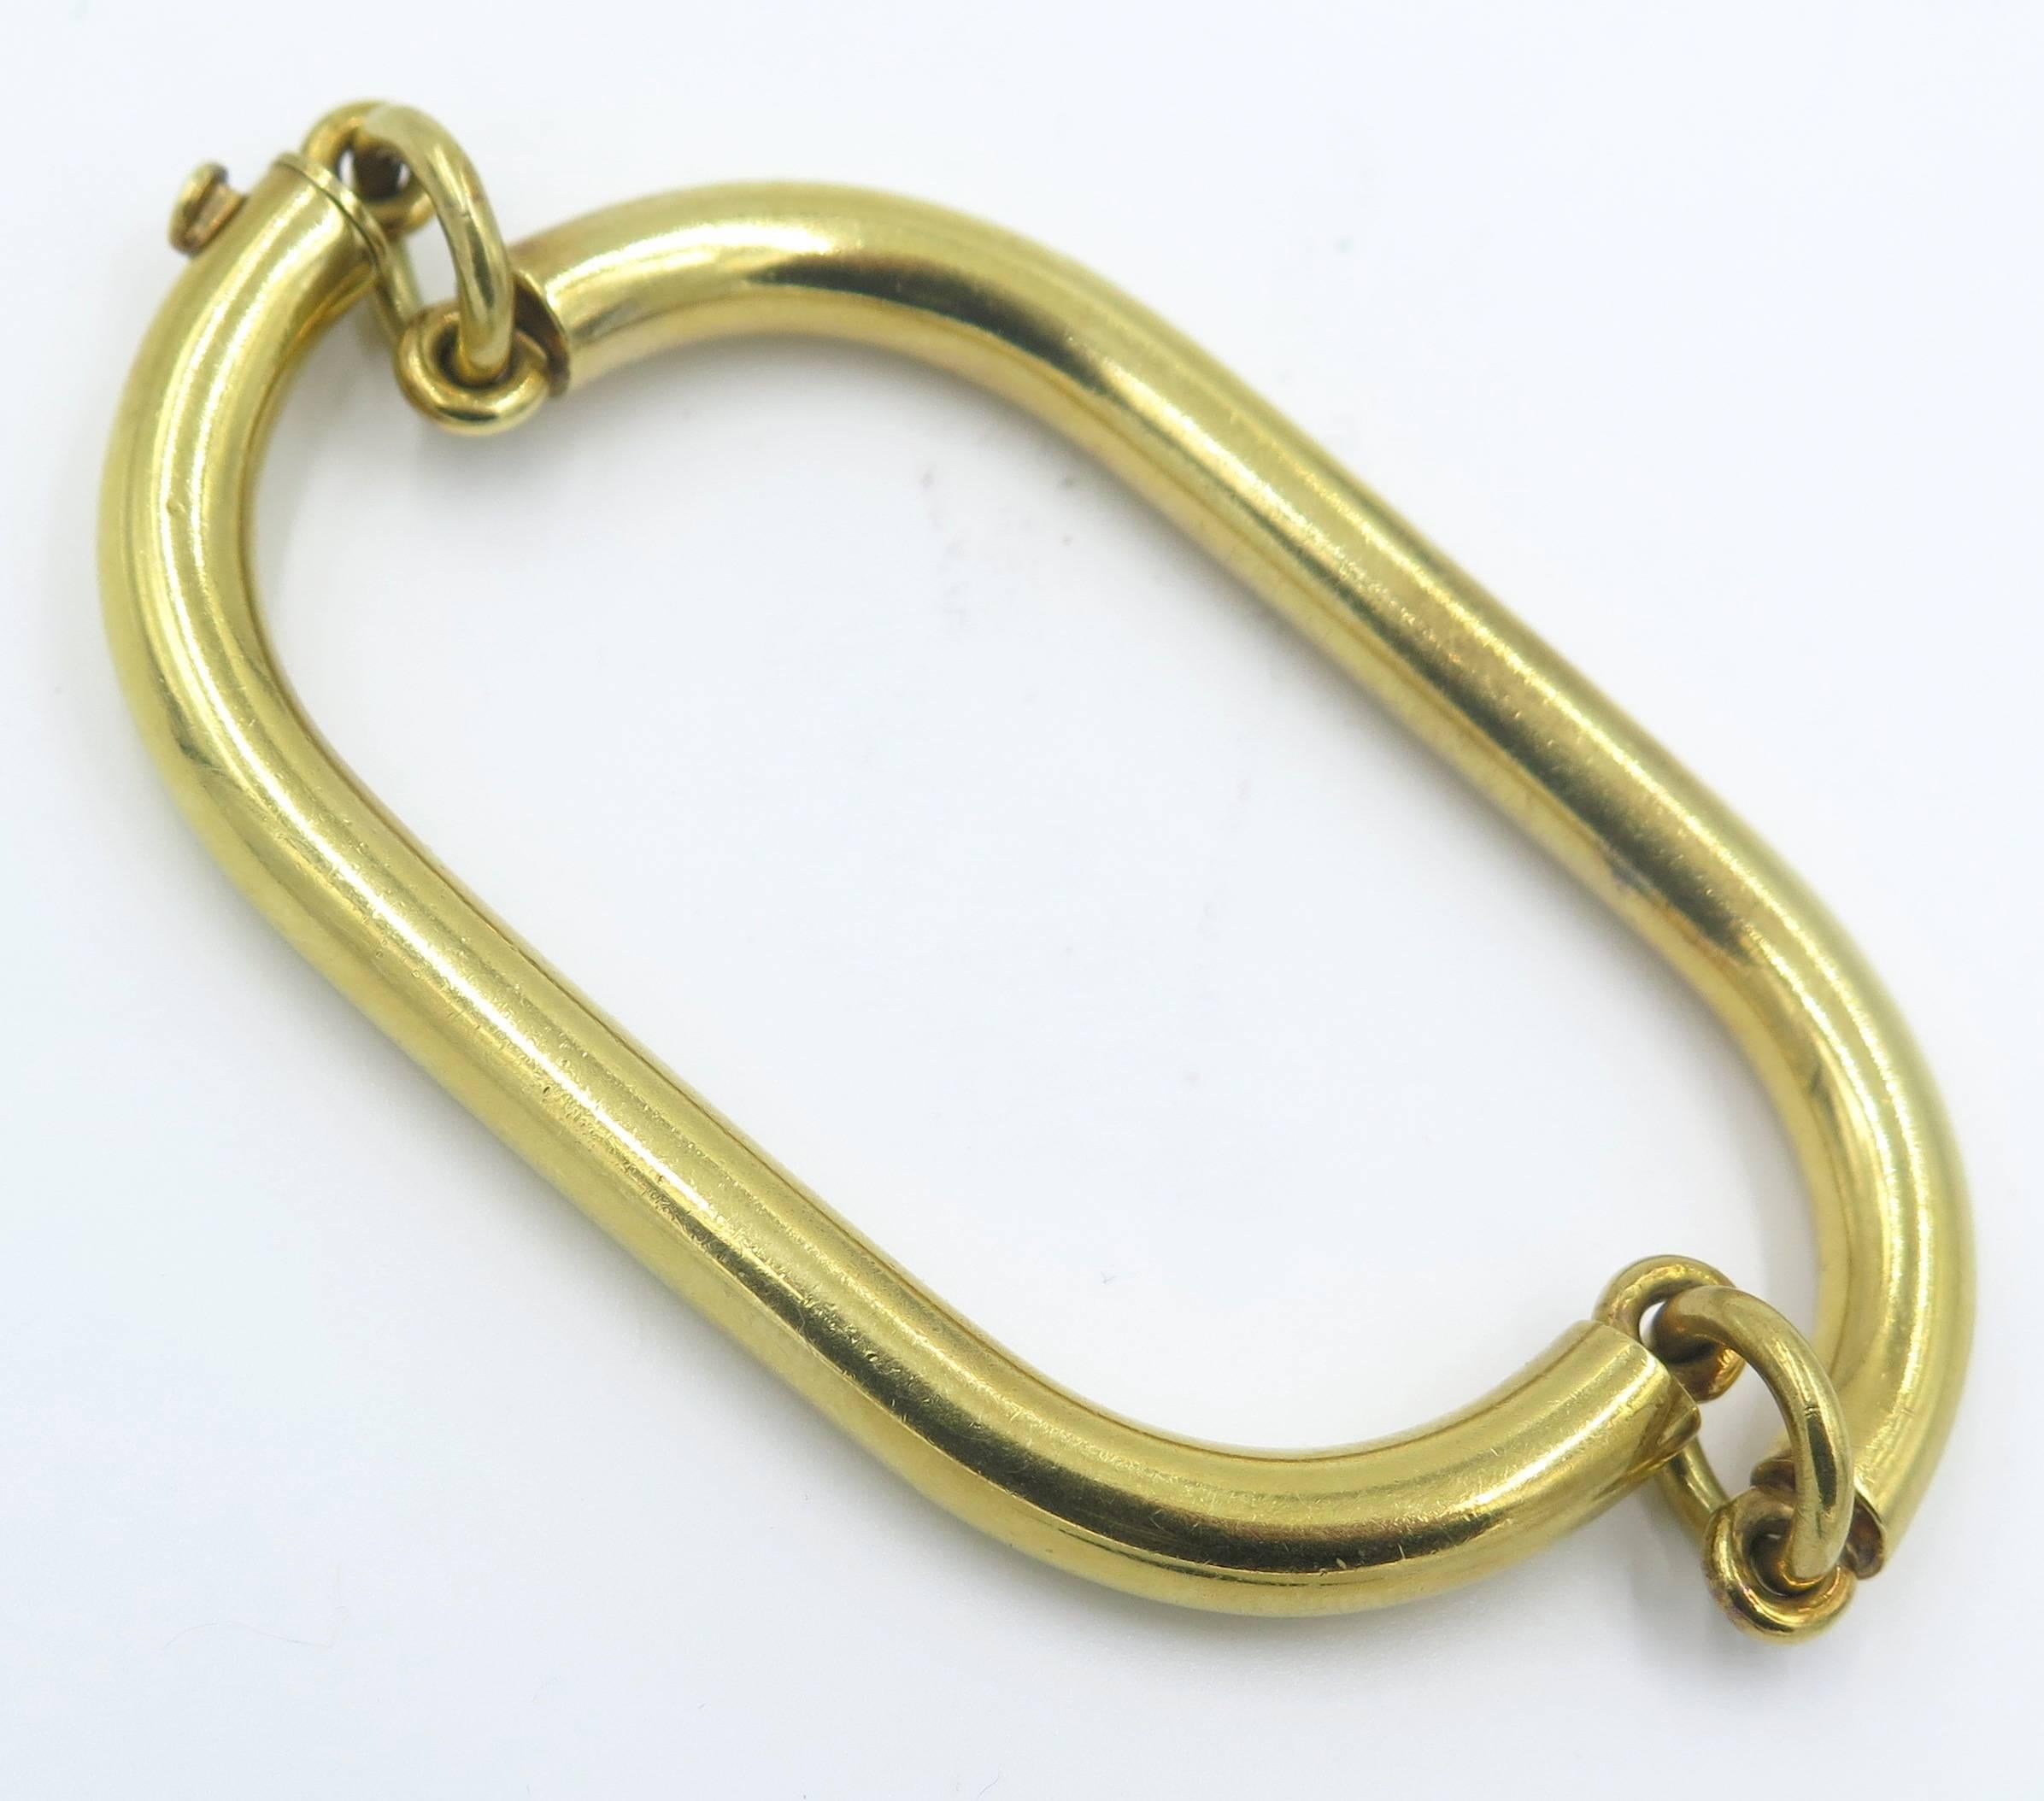 An 18 karat yellow gold bracelet, Puig Doria, Spanish. Circa 1970. Designed as polished gold squared links, joined by circular links. Inside diameter measures 7 inches, Gross weight is approximately 32.9 grams. Signed Puig Doria, Spain.
 